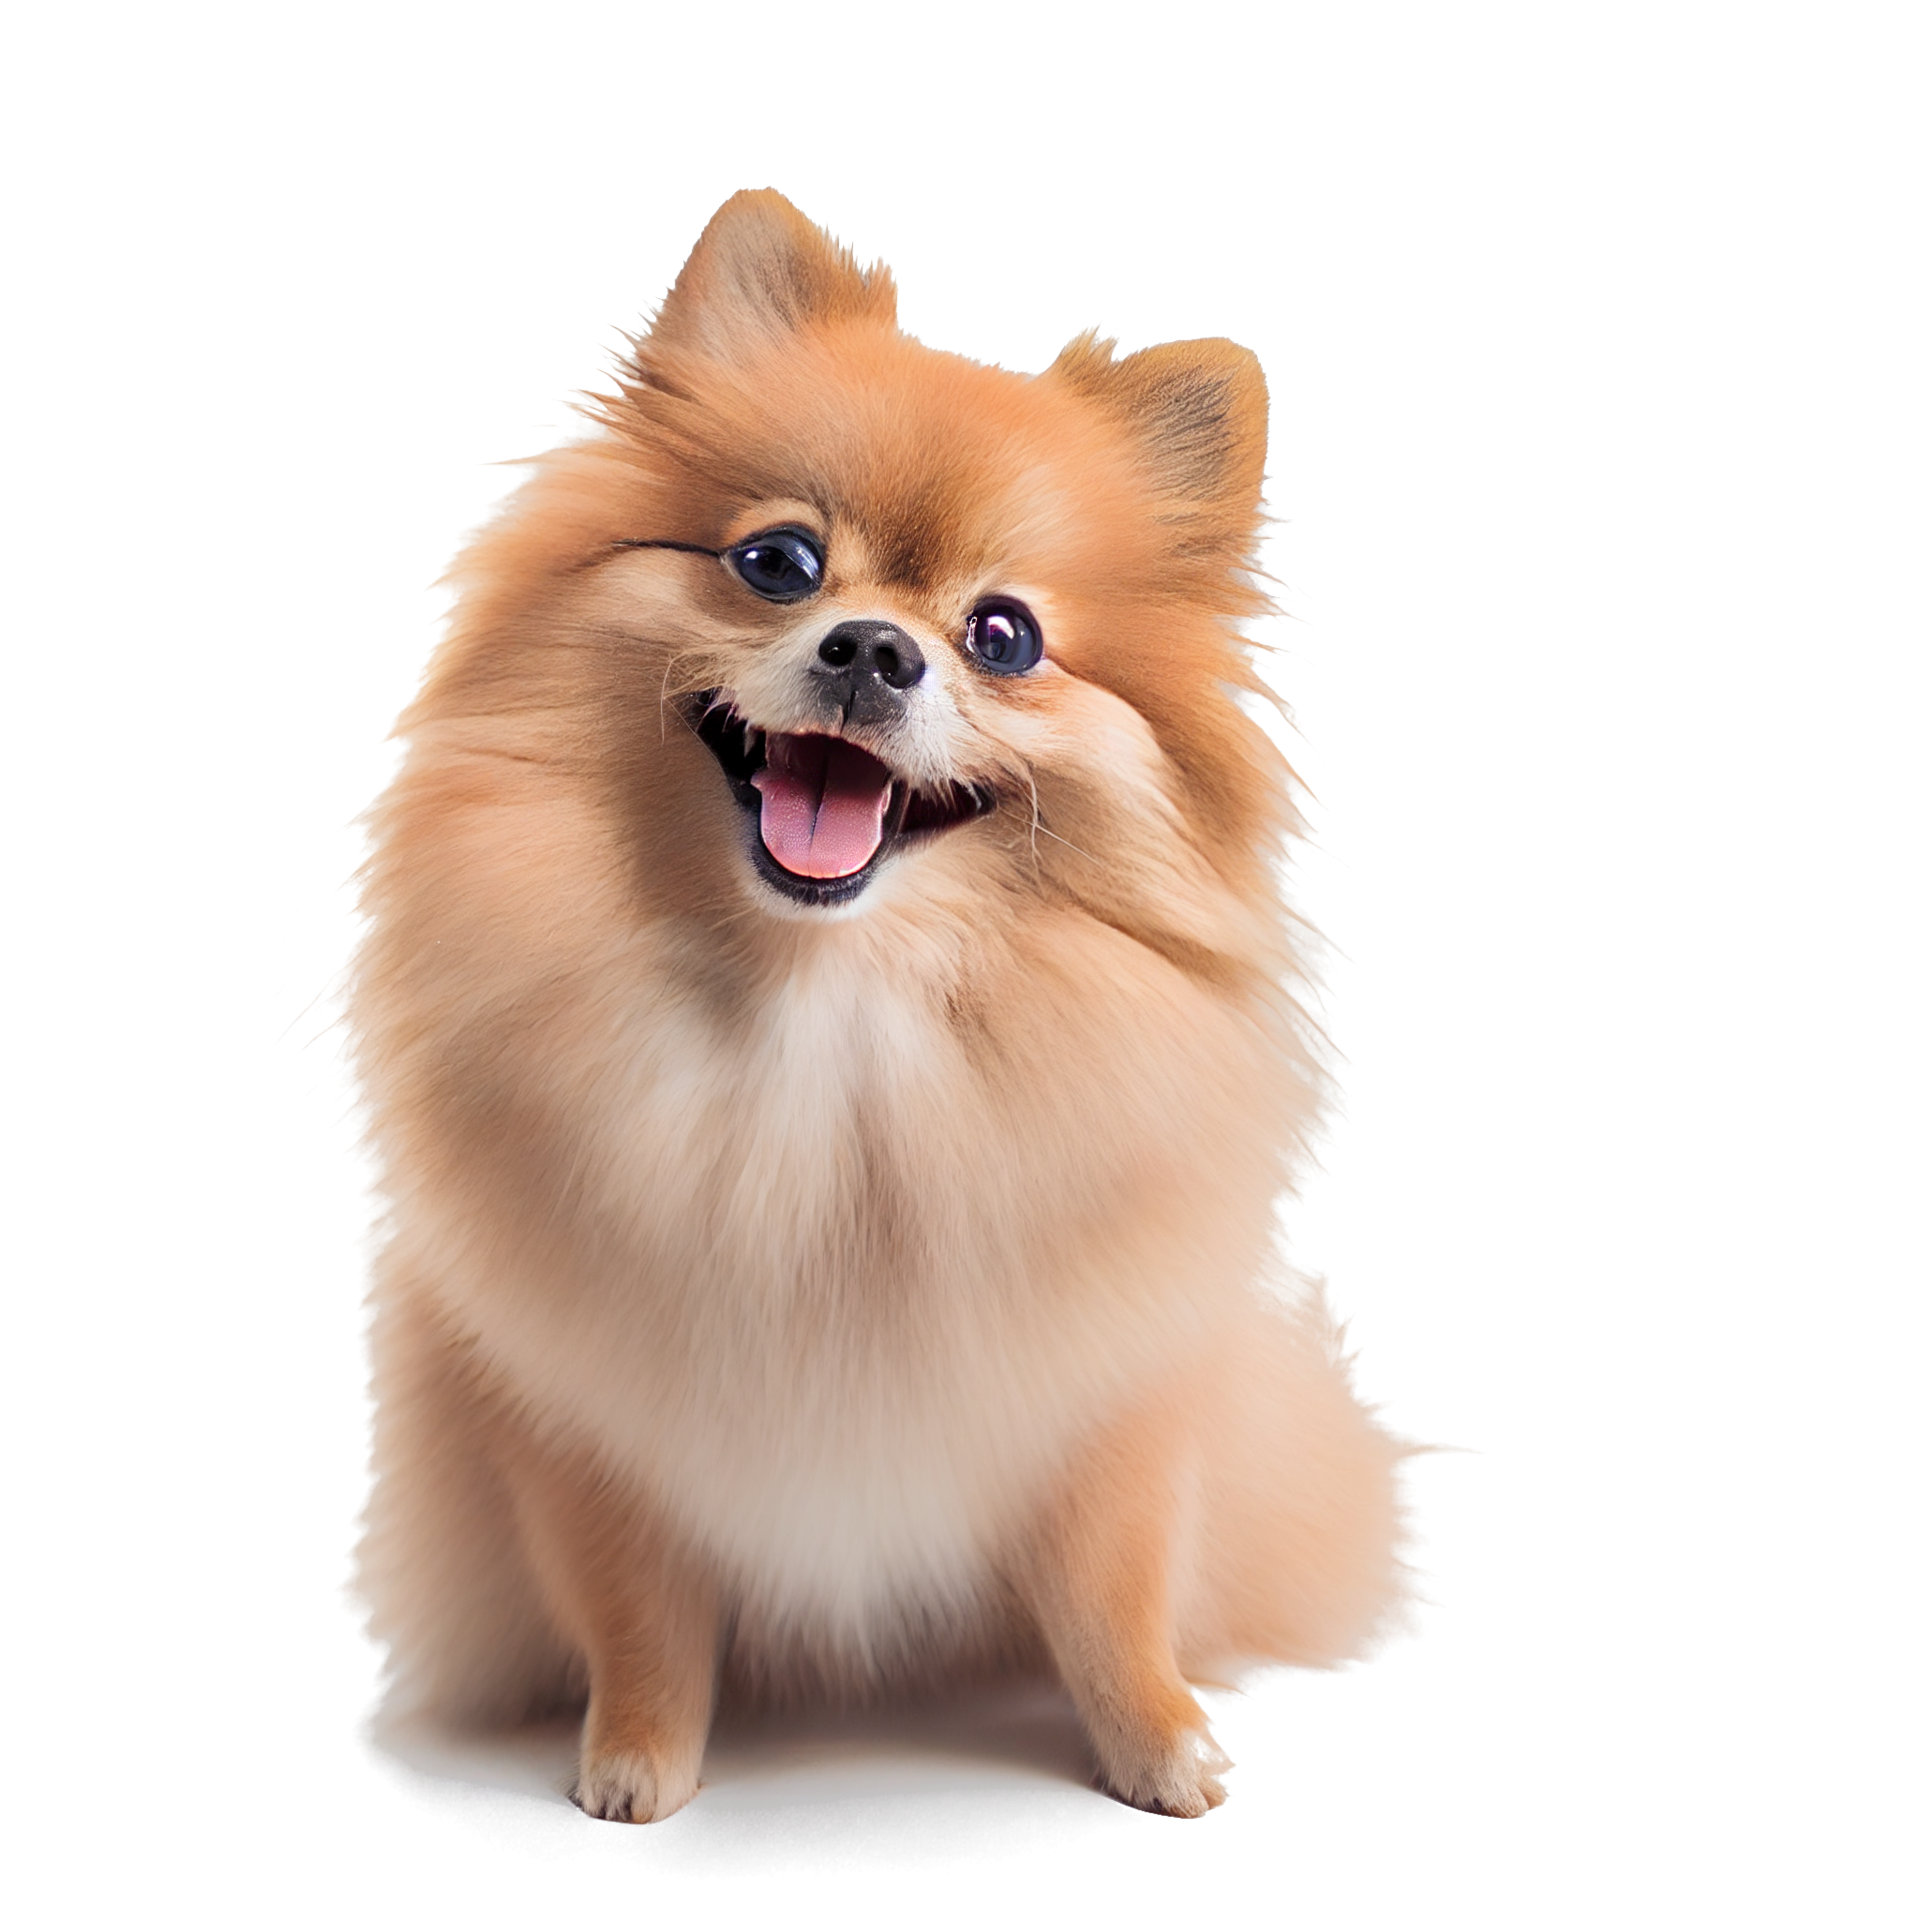 Free Download High-Quality Dog Cute PNG Images For Your Creative Projects